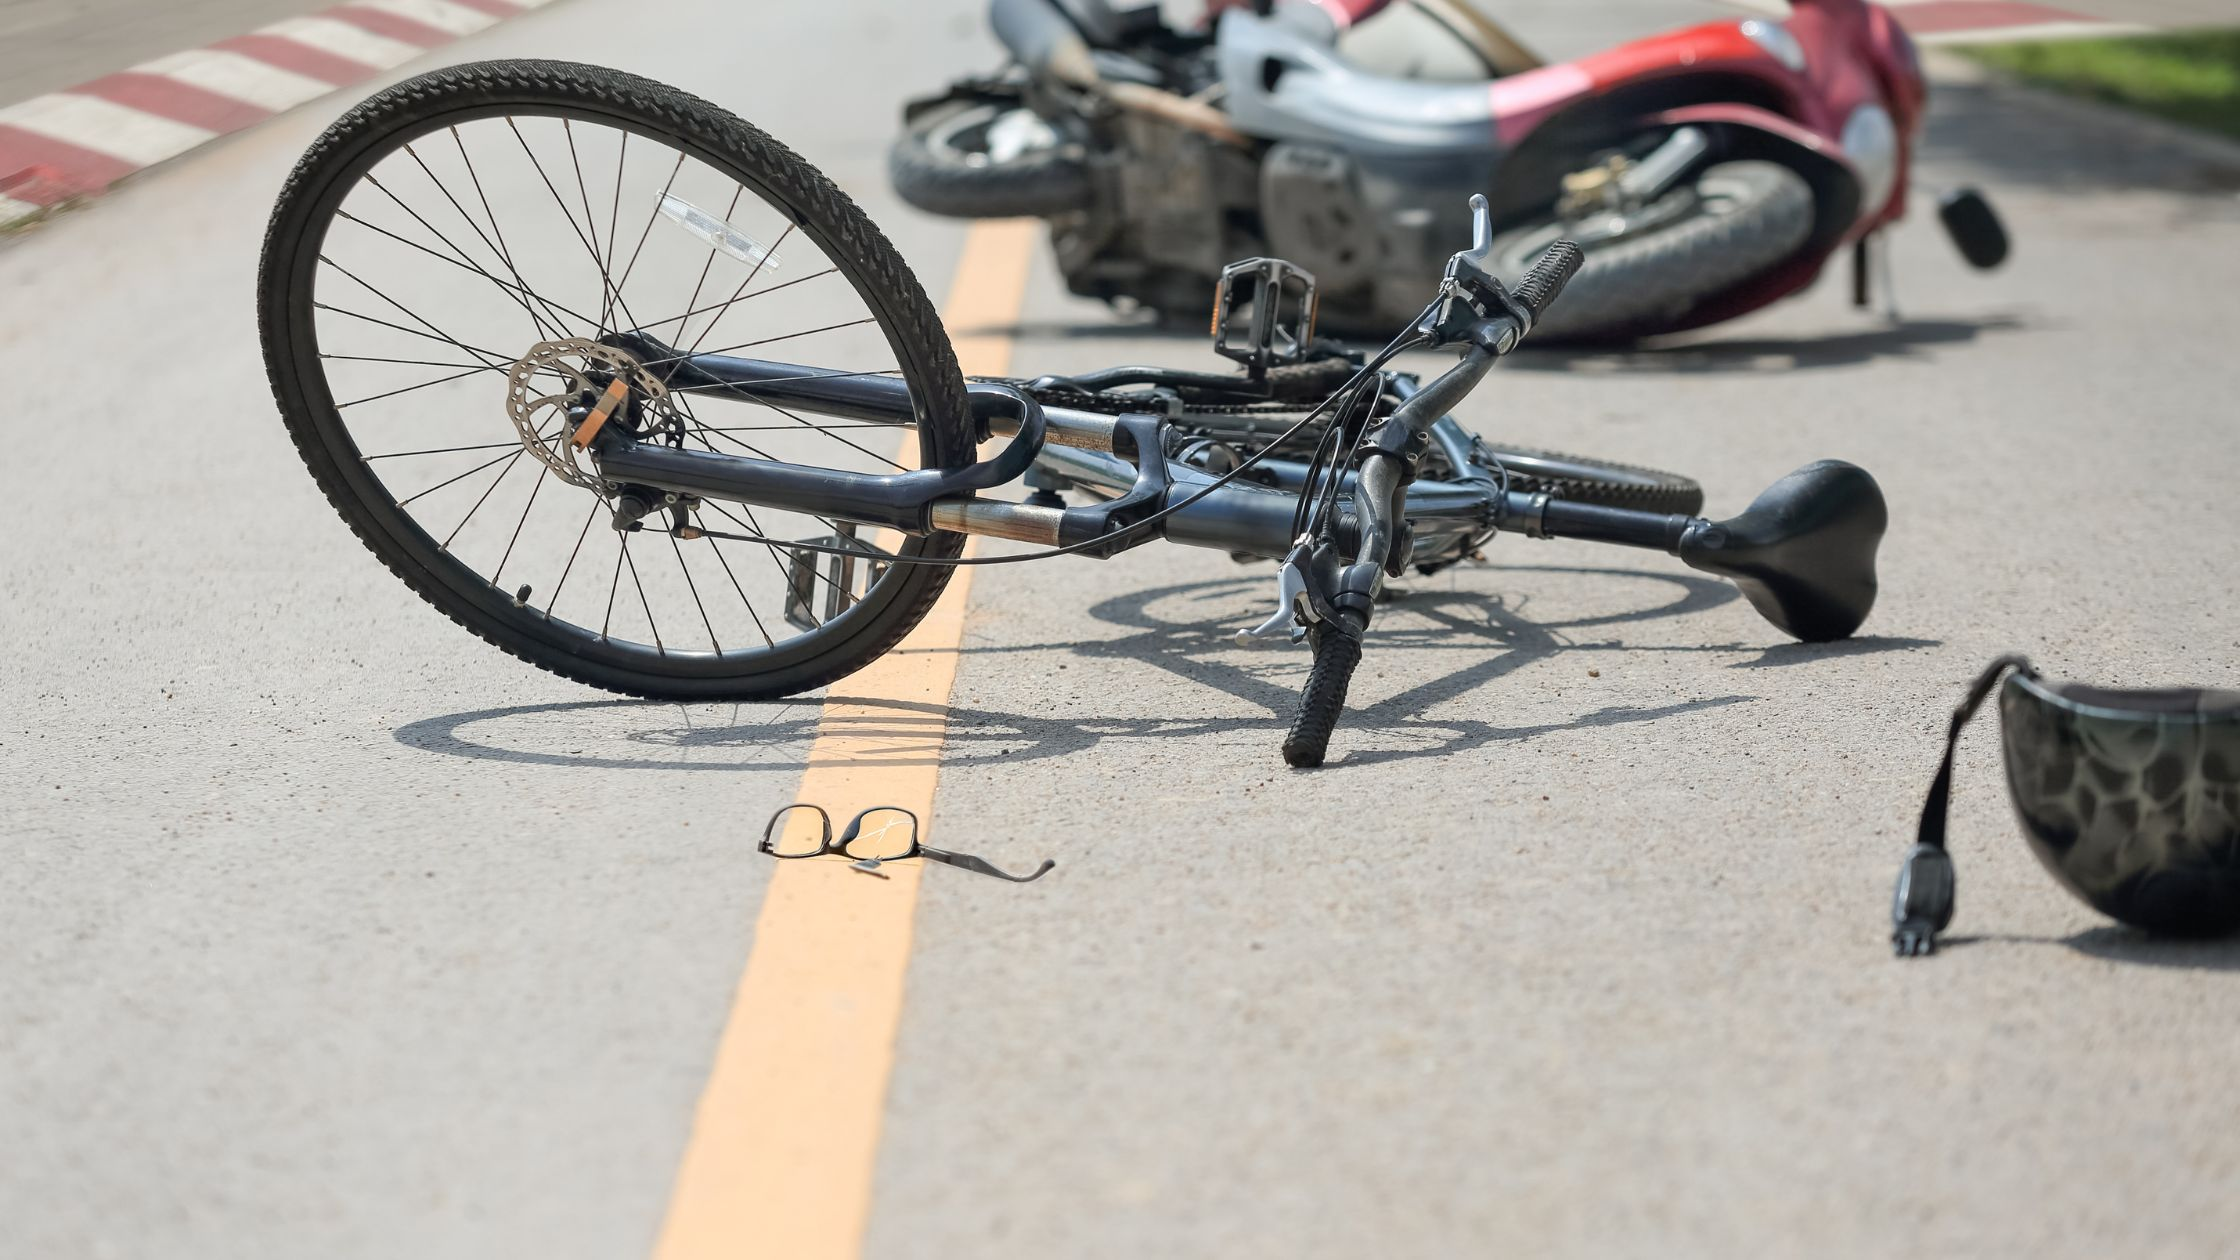 Motorcycle and bicycle accident with legal procedures in Ottawa